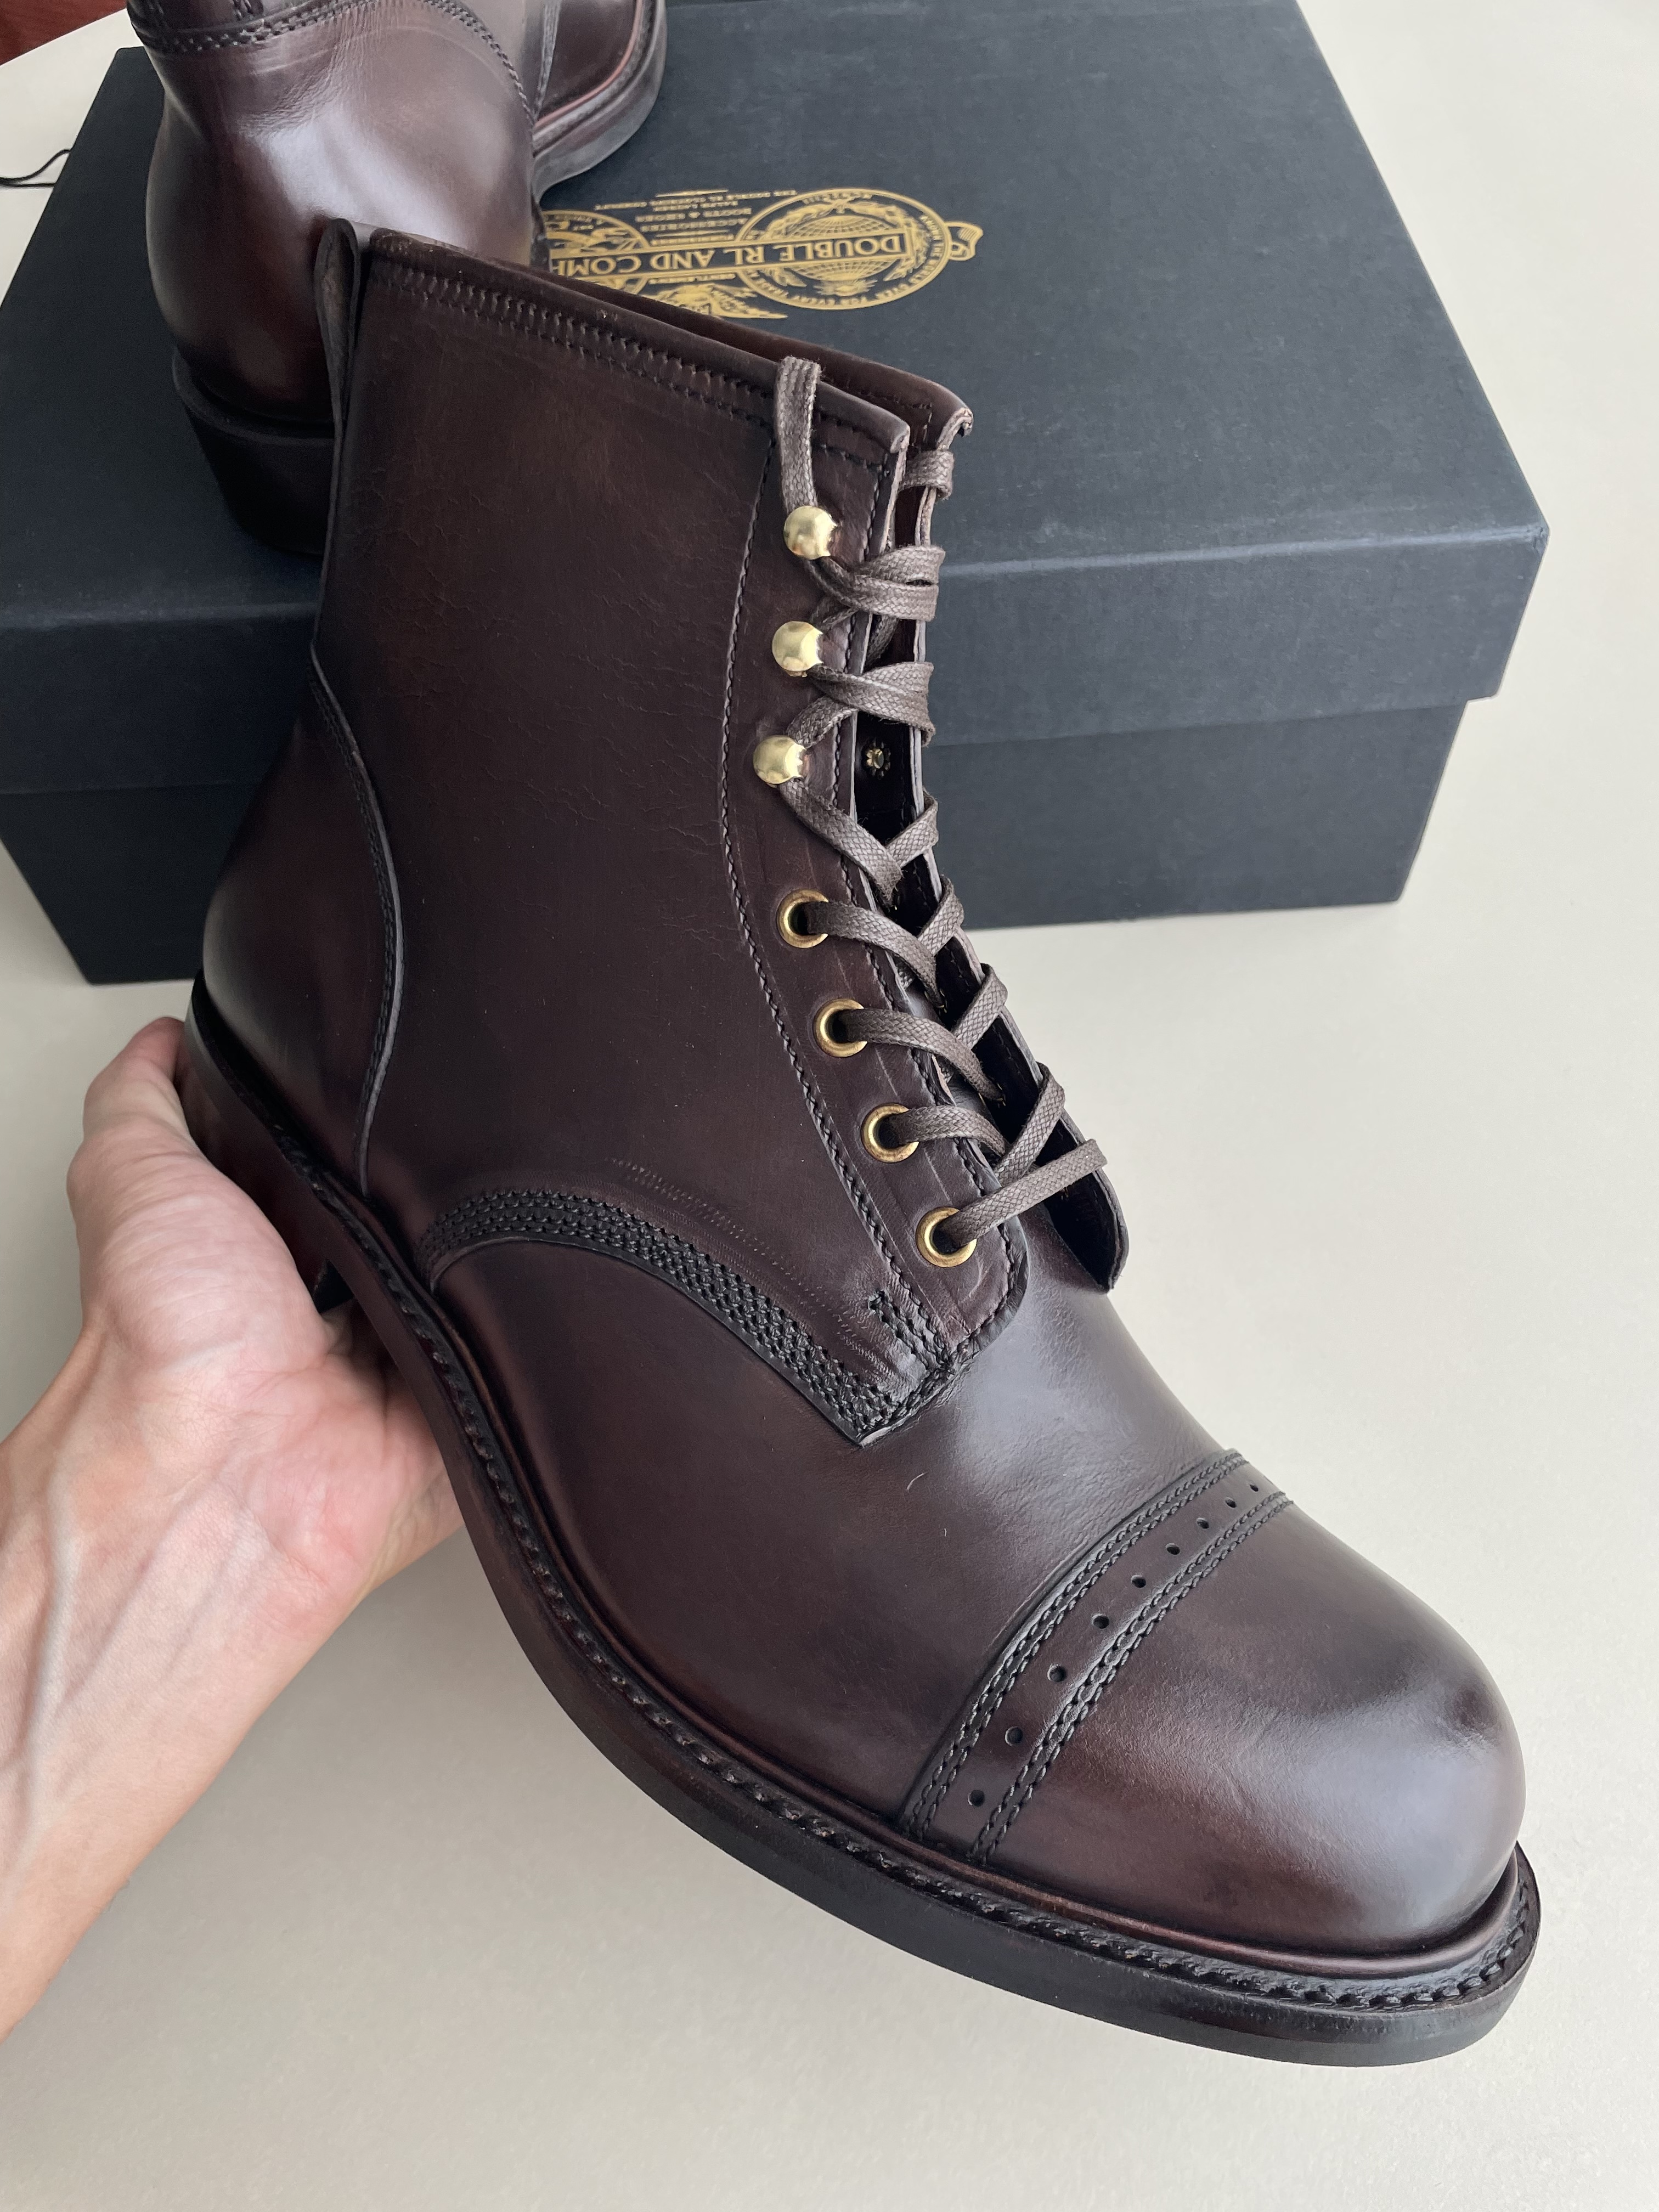 RRL Bowery boots size 12 US, NWT | The Fedora Lounge